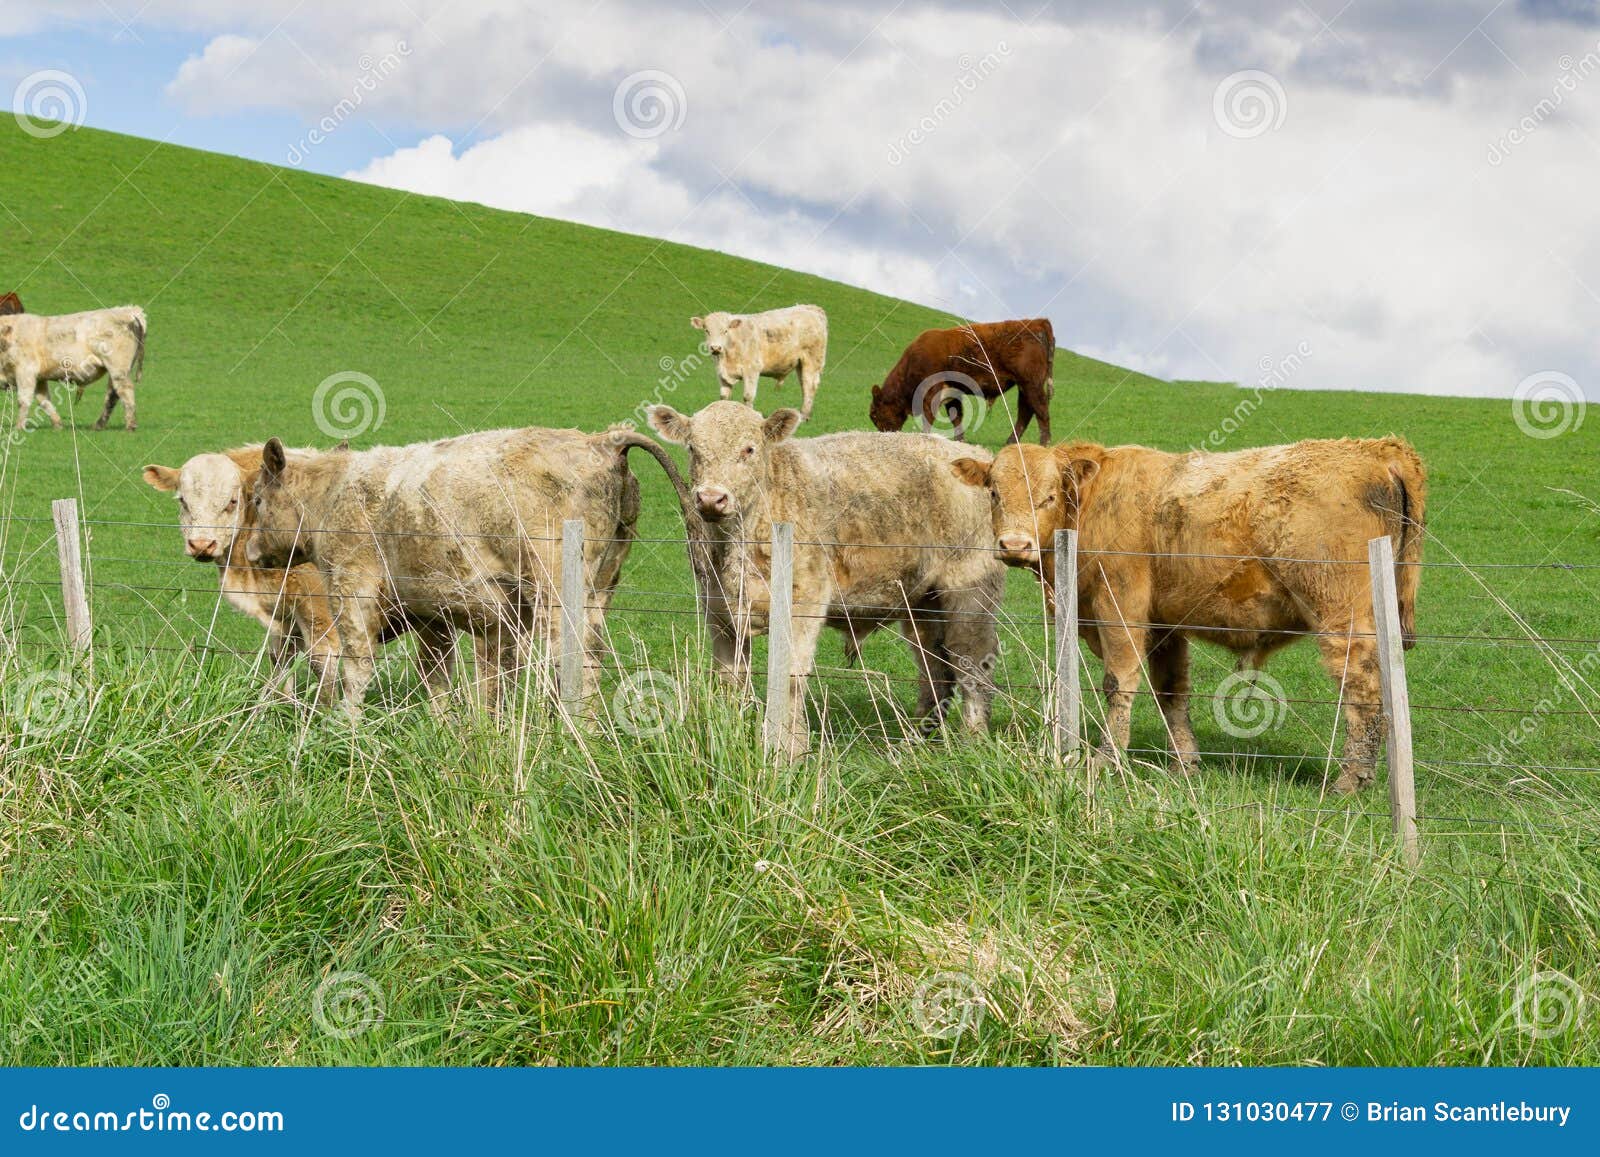 Cattle In Field In Rural New Zealand Royalty-Free Stock Photography ...